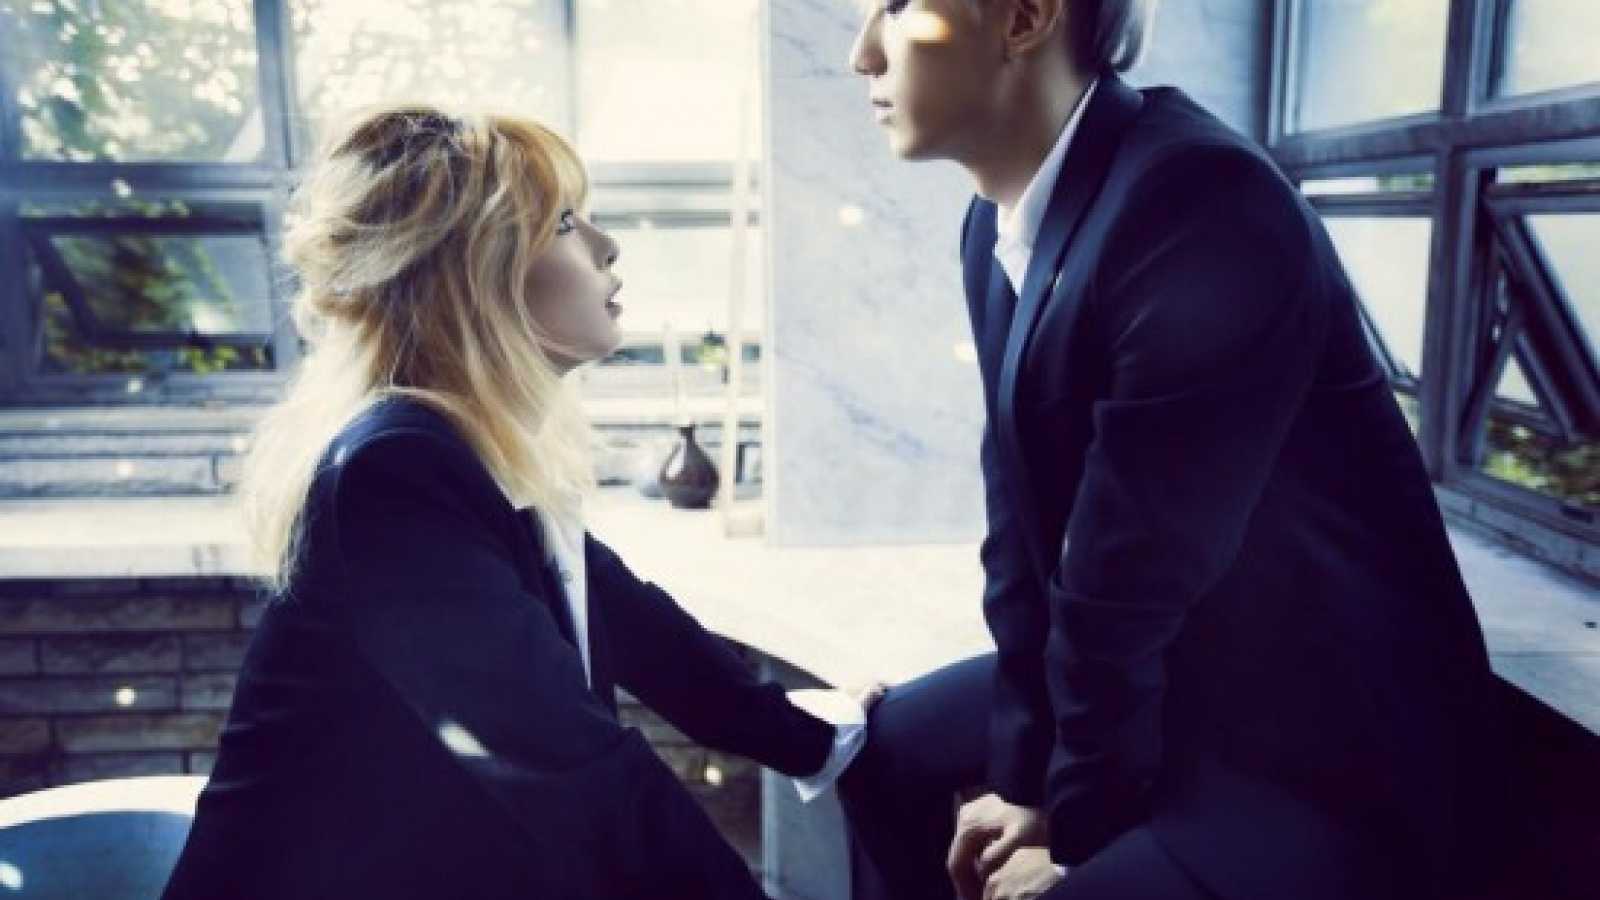 Trouble Maker © Cube Entertainment. All rights reserved